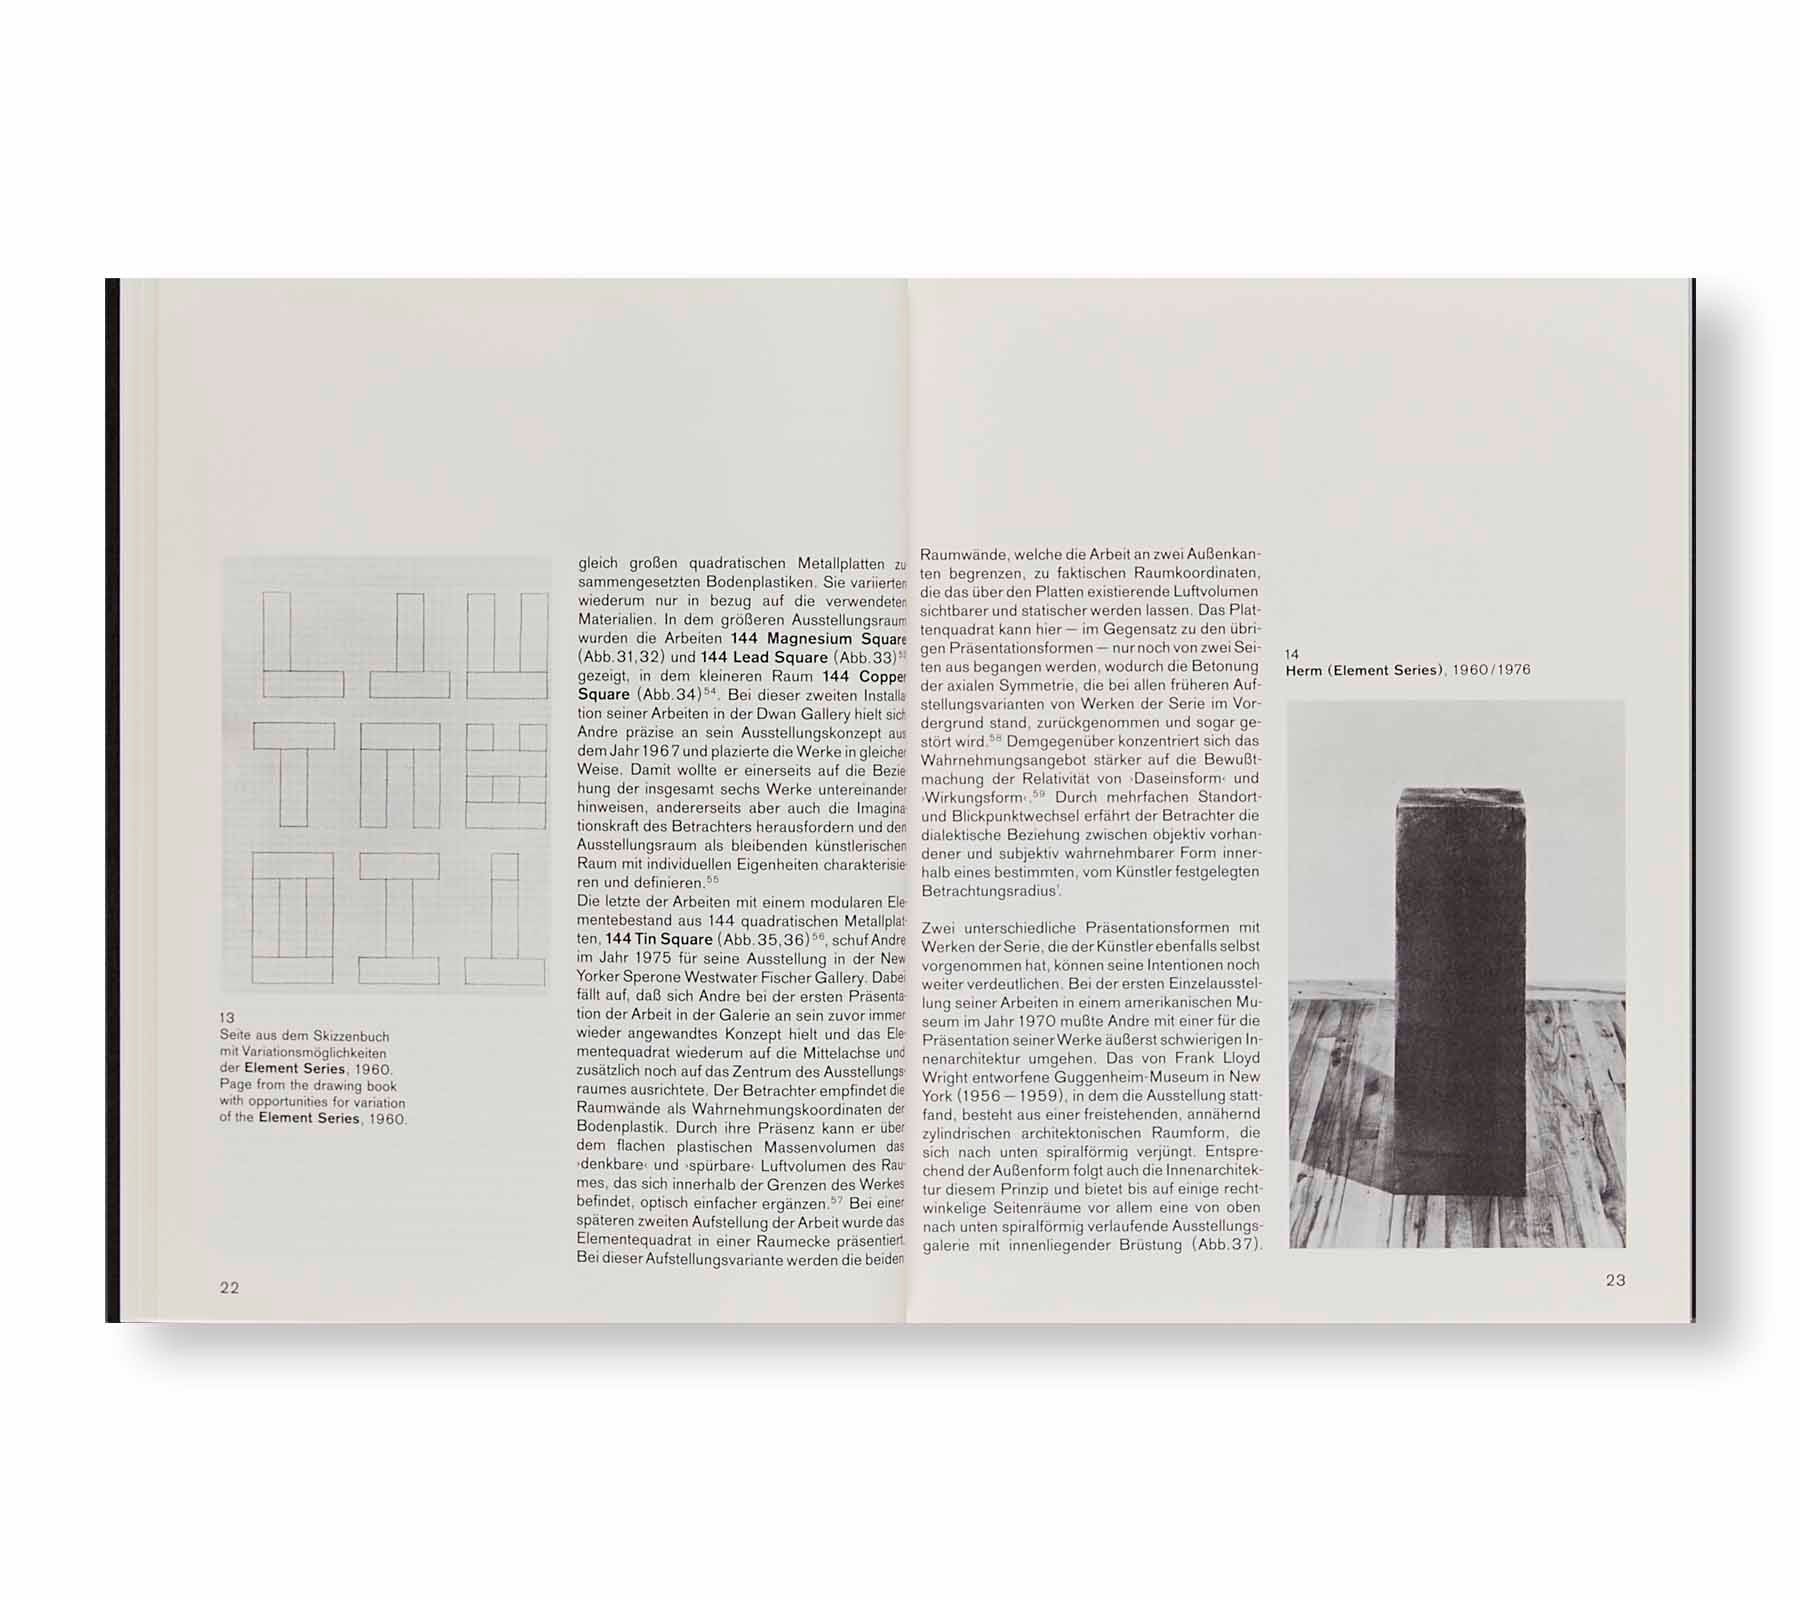 CARL ANDRE – EXTRANEOUS ROOTS by Carl Andre